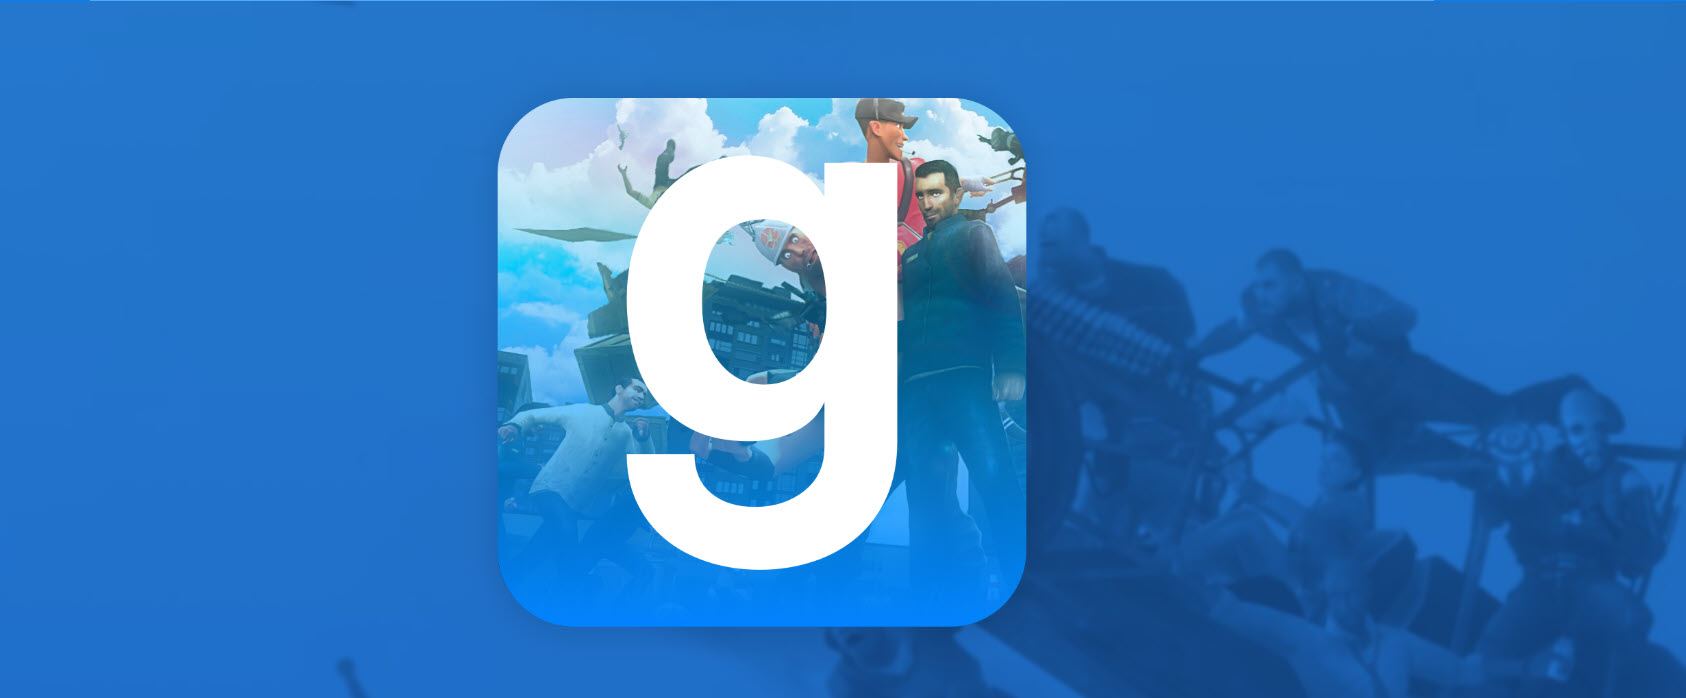 I play Garry's mod but mobile version 